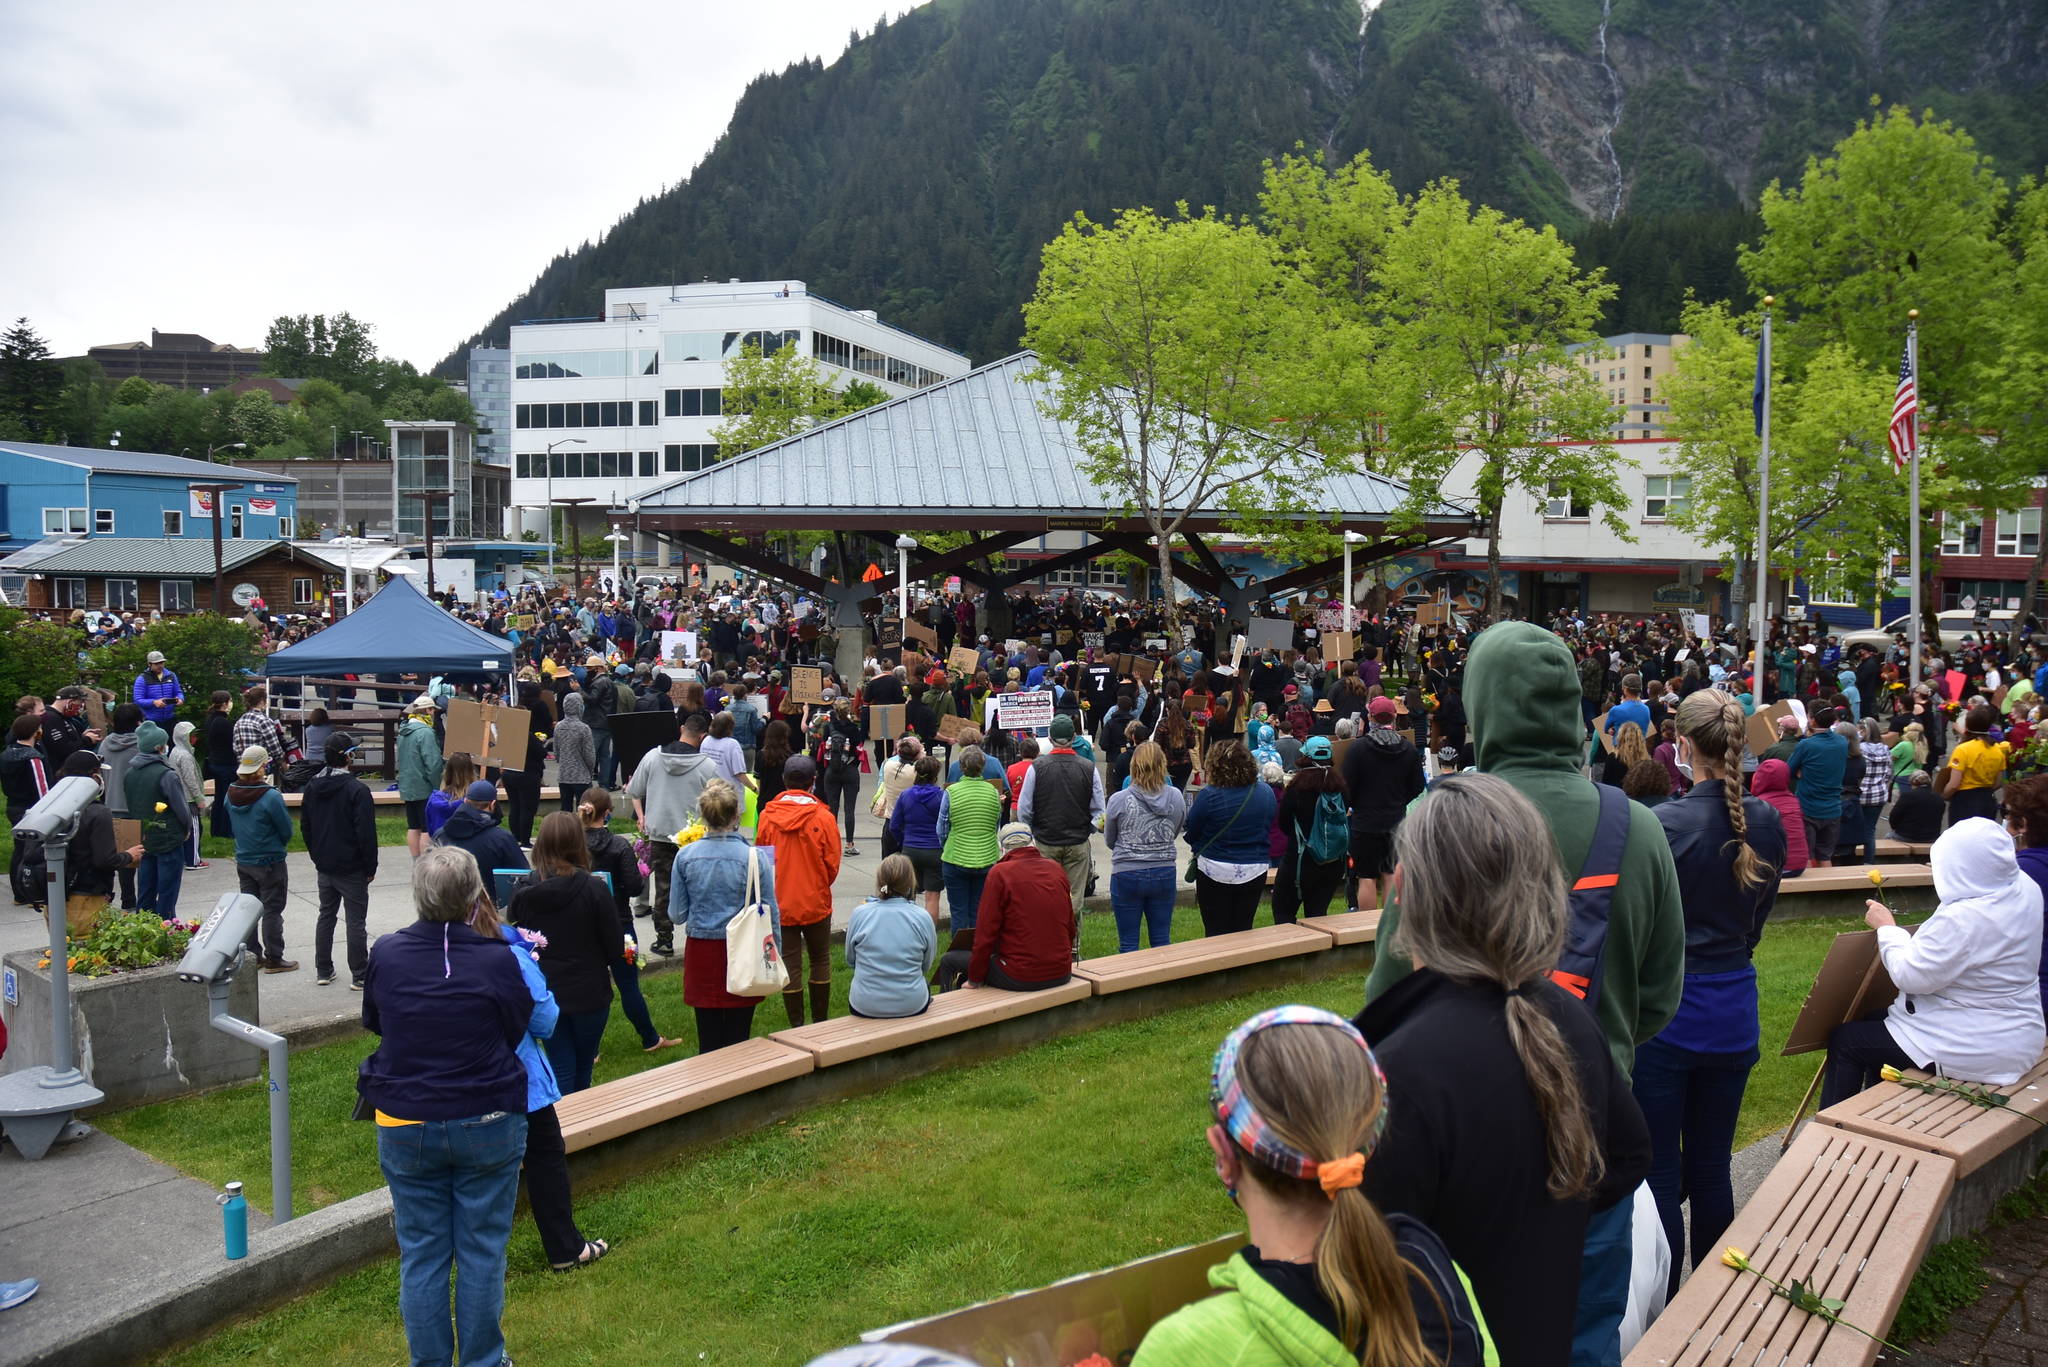 Peter Segall / Juneau Empire                                 Hundreds gathered at Marine Park in downtown Juneau on June 7, 2020, for a rally and march calling for an end to police violence and systemic racism in America. Protesters issued a number of demands at the rally, and the City and Borough of Juneau has been trying to address some of those issues.